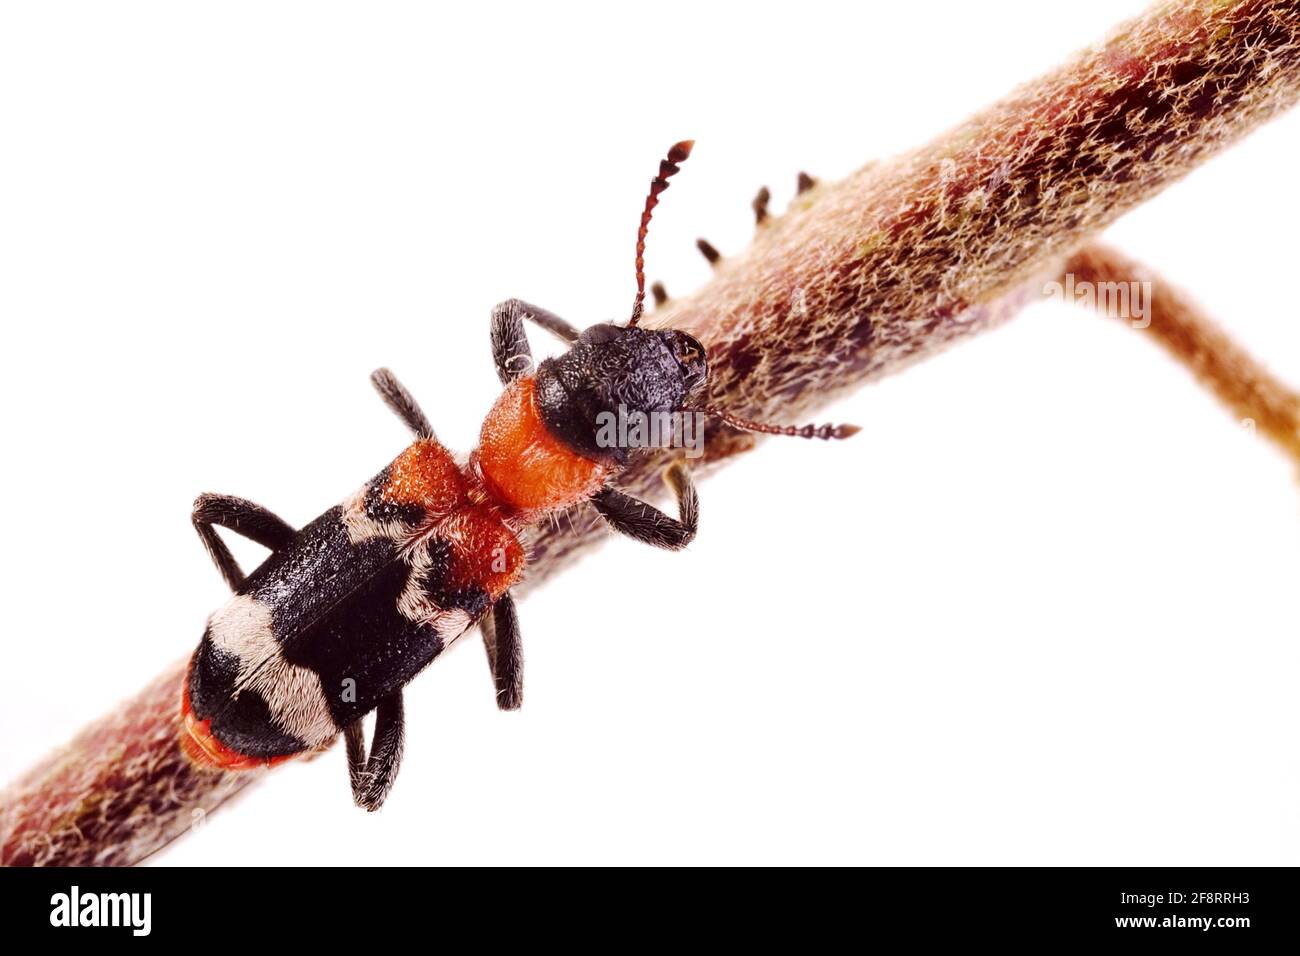 Ant beetle, European Red-bellied Clerid (Thanasimus formicarius), on a stem, cut-out Stock Photo